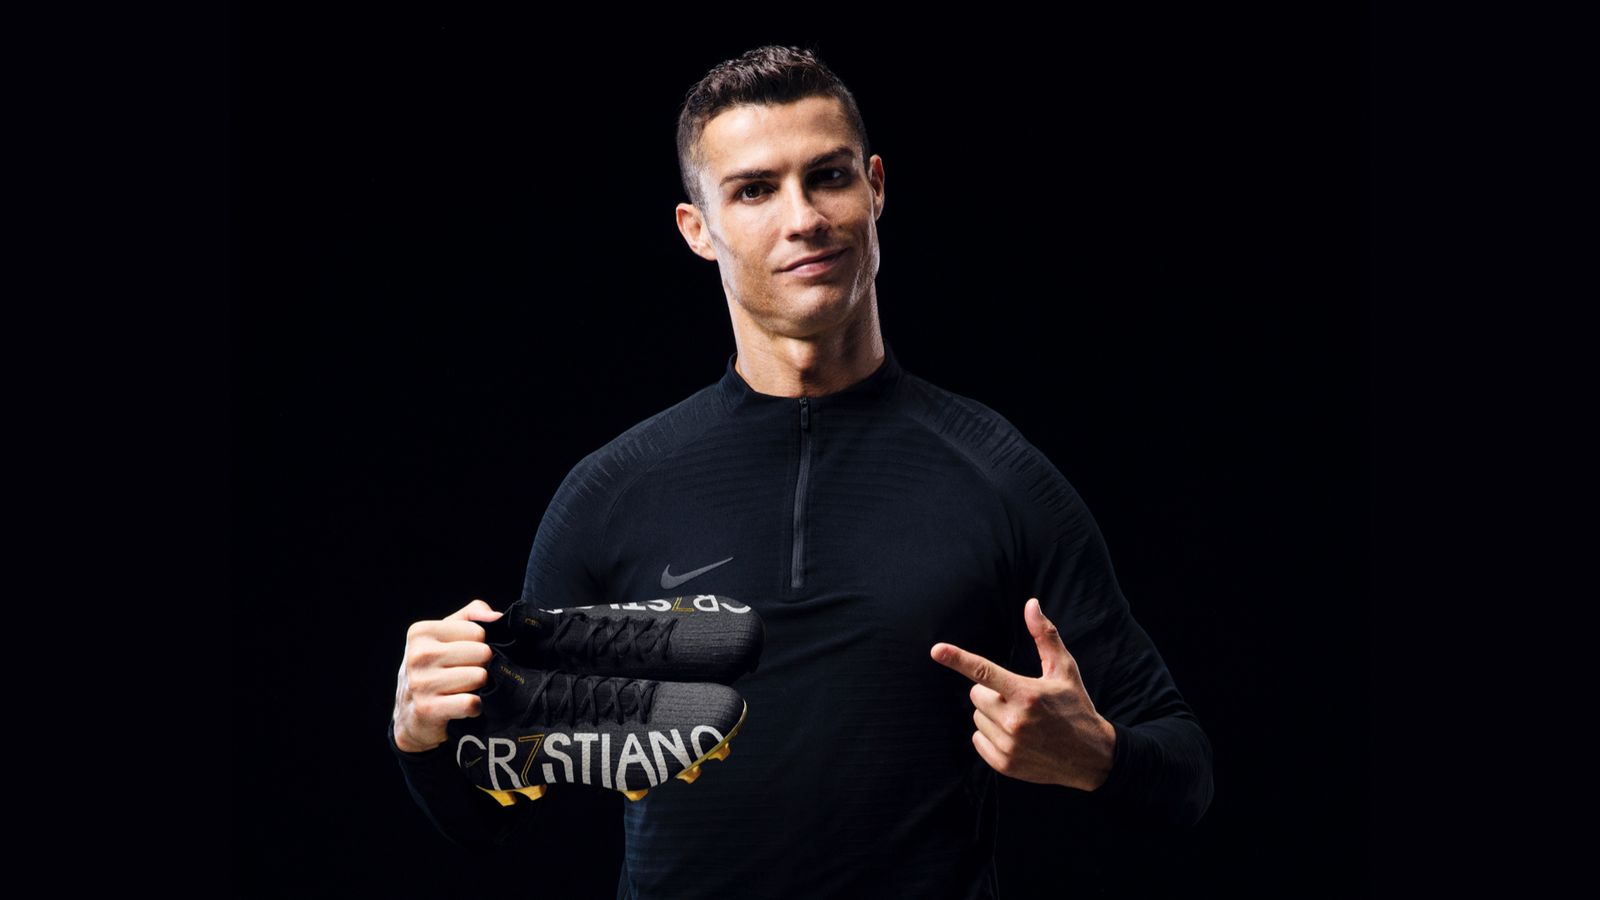 Restock: Limited-Edition Mercurial Superfly Cristiano Ronaldo 2019 Signature Boots Released - Footy Headlines